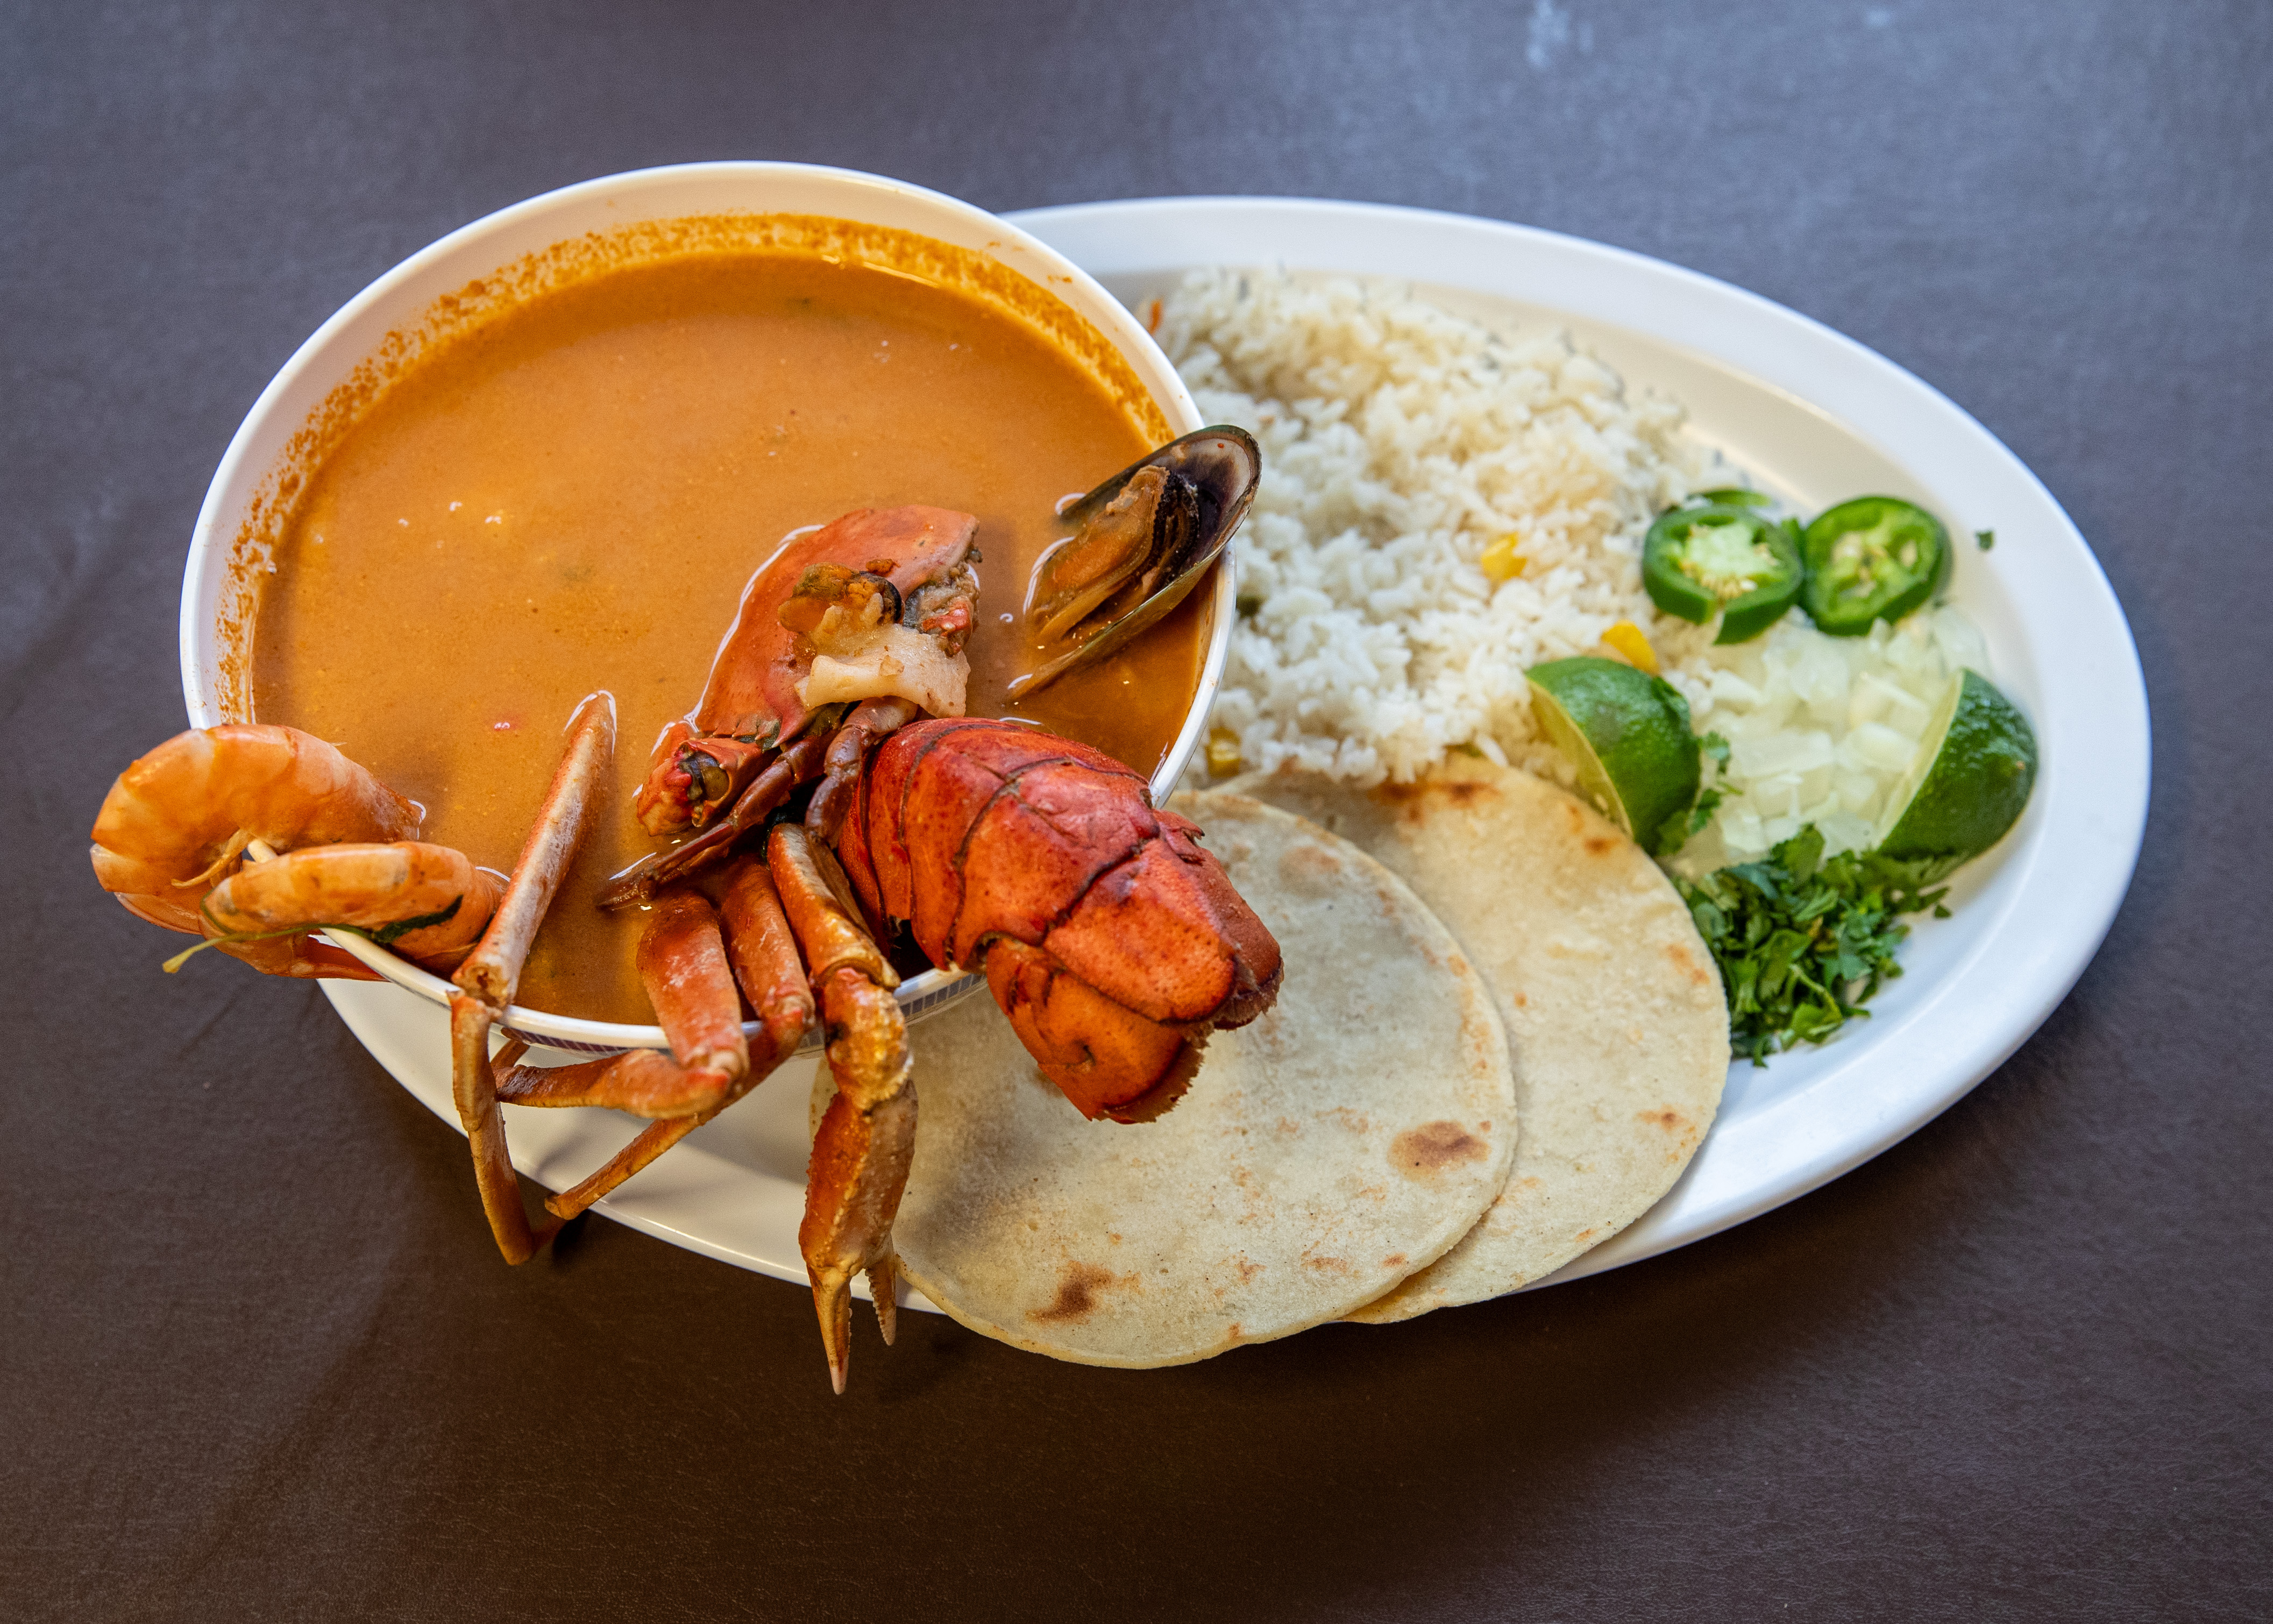 Mariscada Soup (seafood soup that includes lobster, fish, shrimp, mussels, and octopus) that comes with rice, two homemade tortillas, onion, lime, jalapeño for $26.98 at Pupuseria El Salvador in Wyoming on Thursday, Oct. 19, 2023. (Cory Morse | MLive.com)
